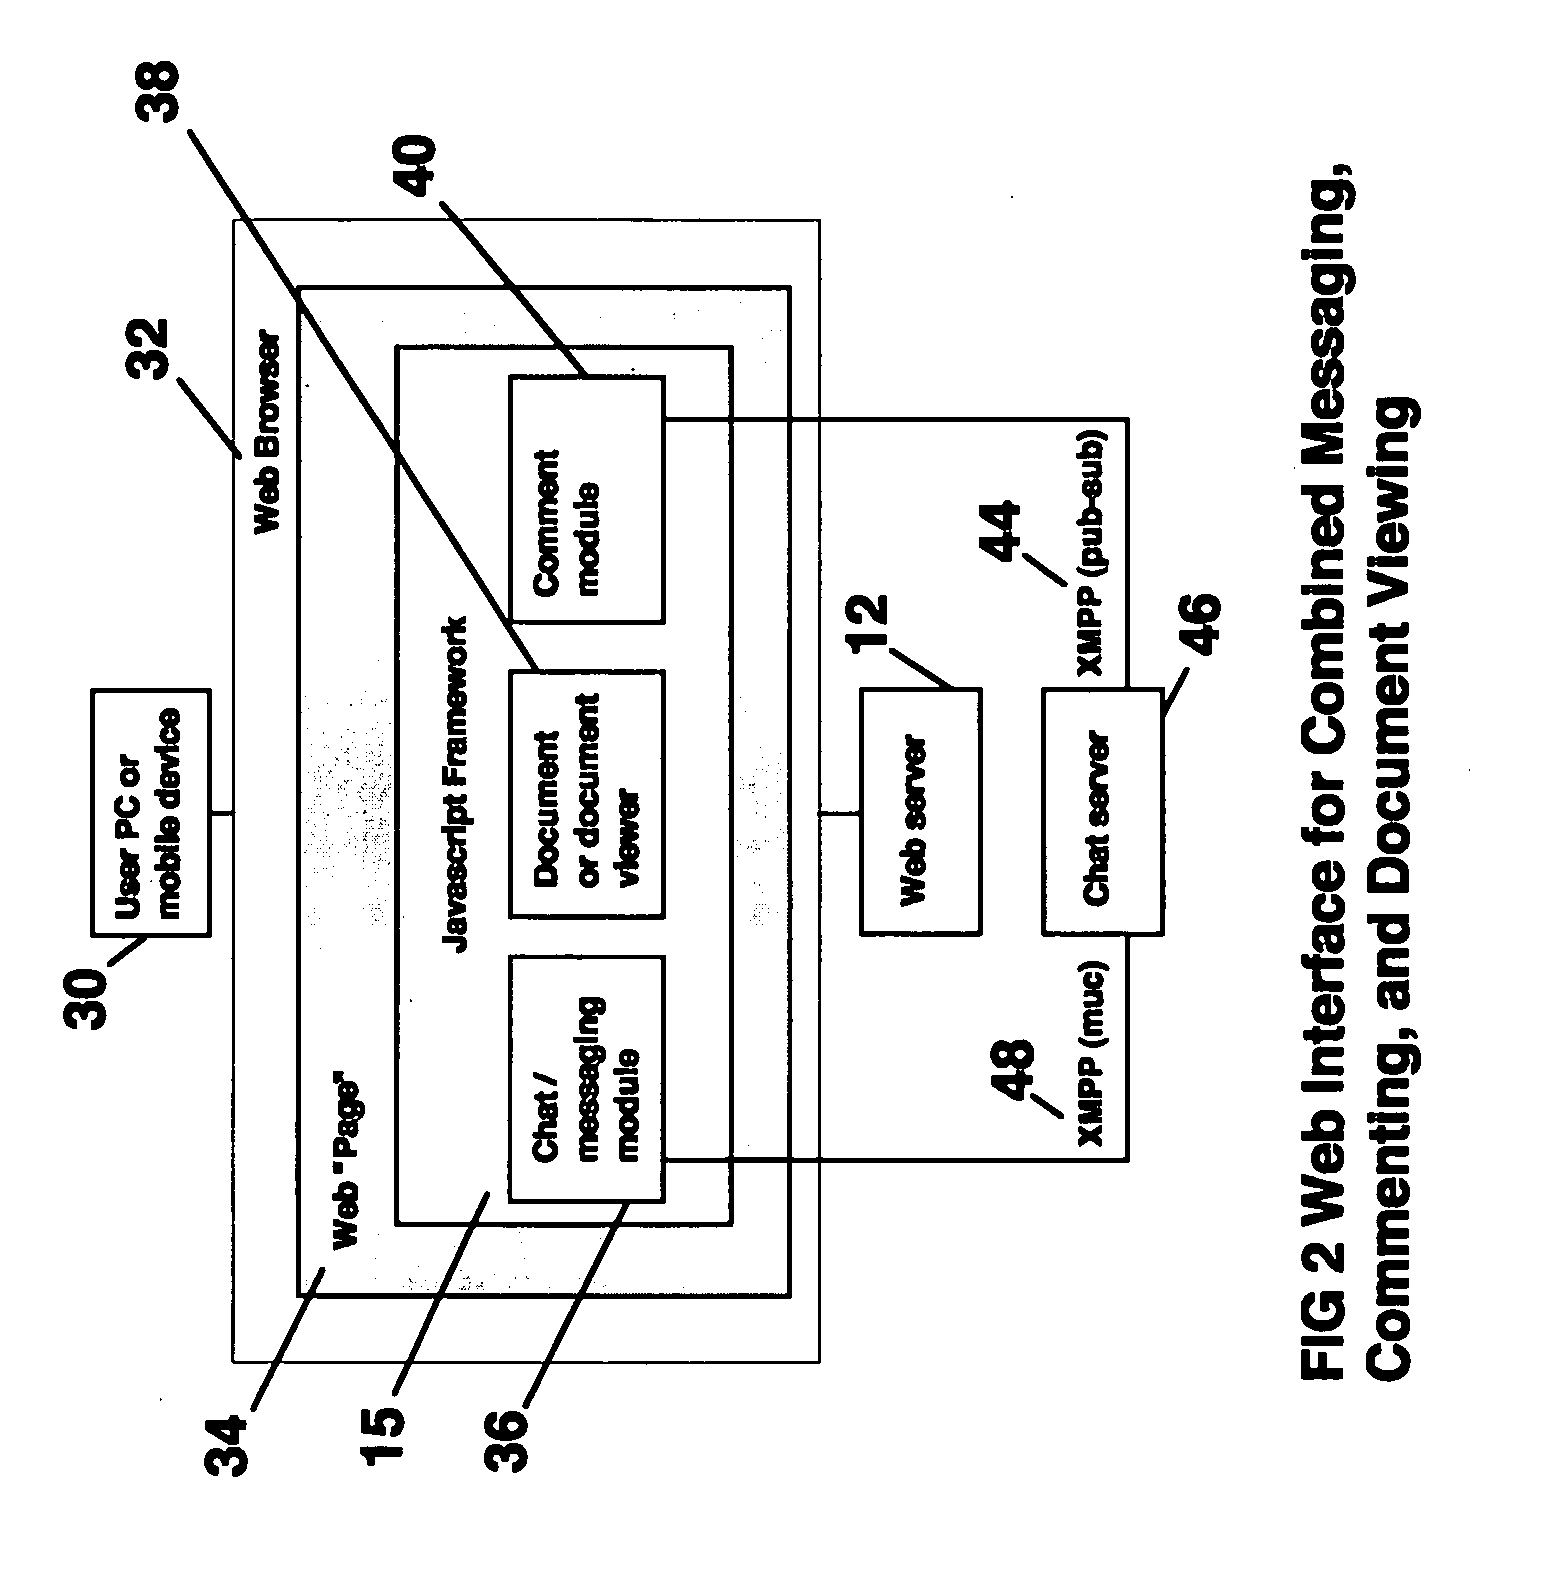 Method for allowing users of a document to pass messages to each other in a context-specific manner